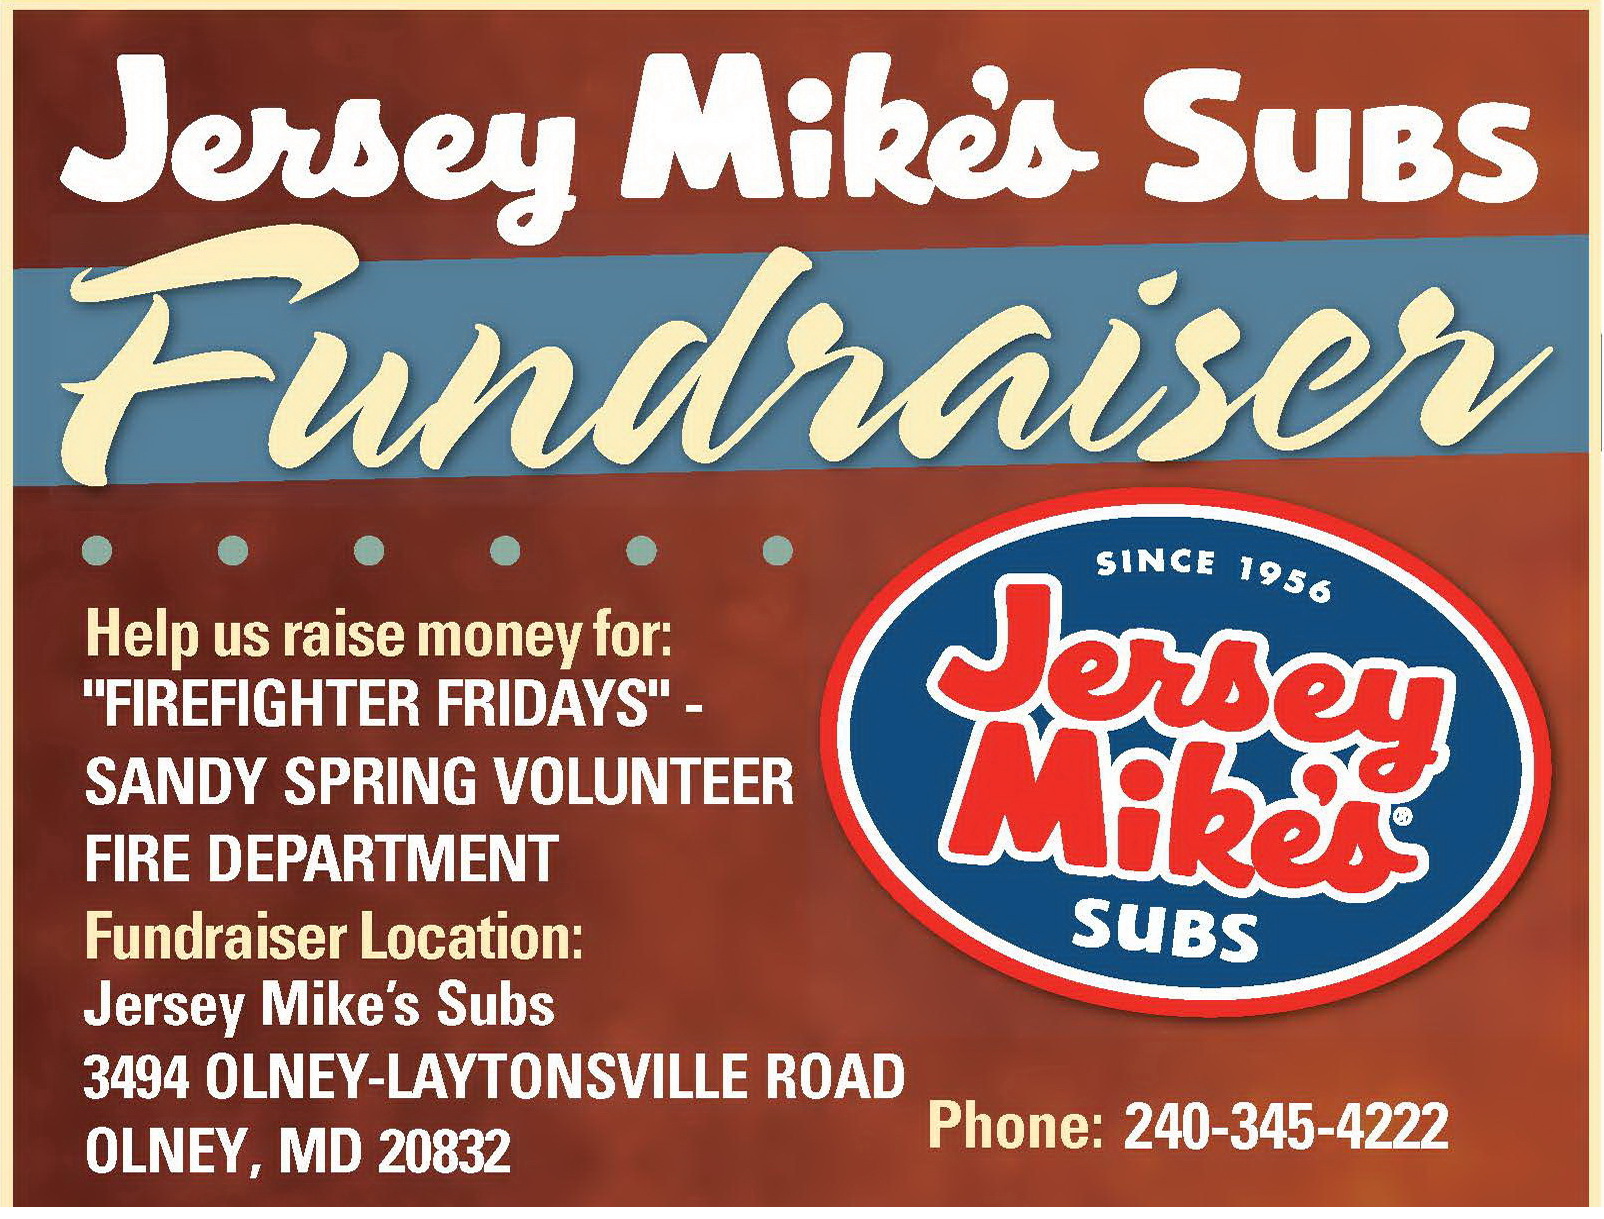 Los Gatos Jersey Mike's Donating Sales To Firefighters For A Day